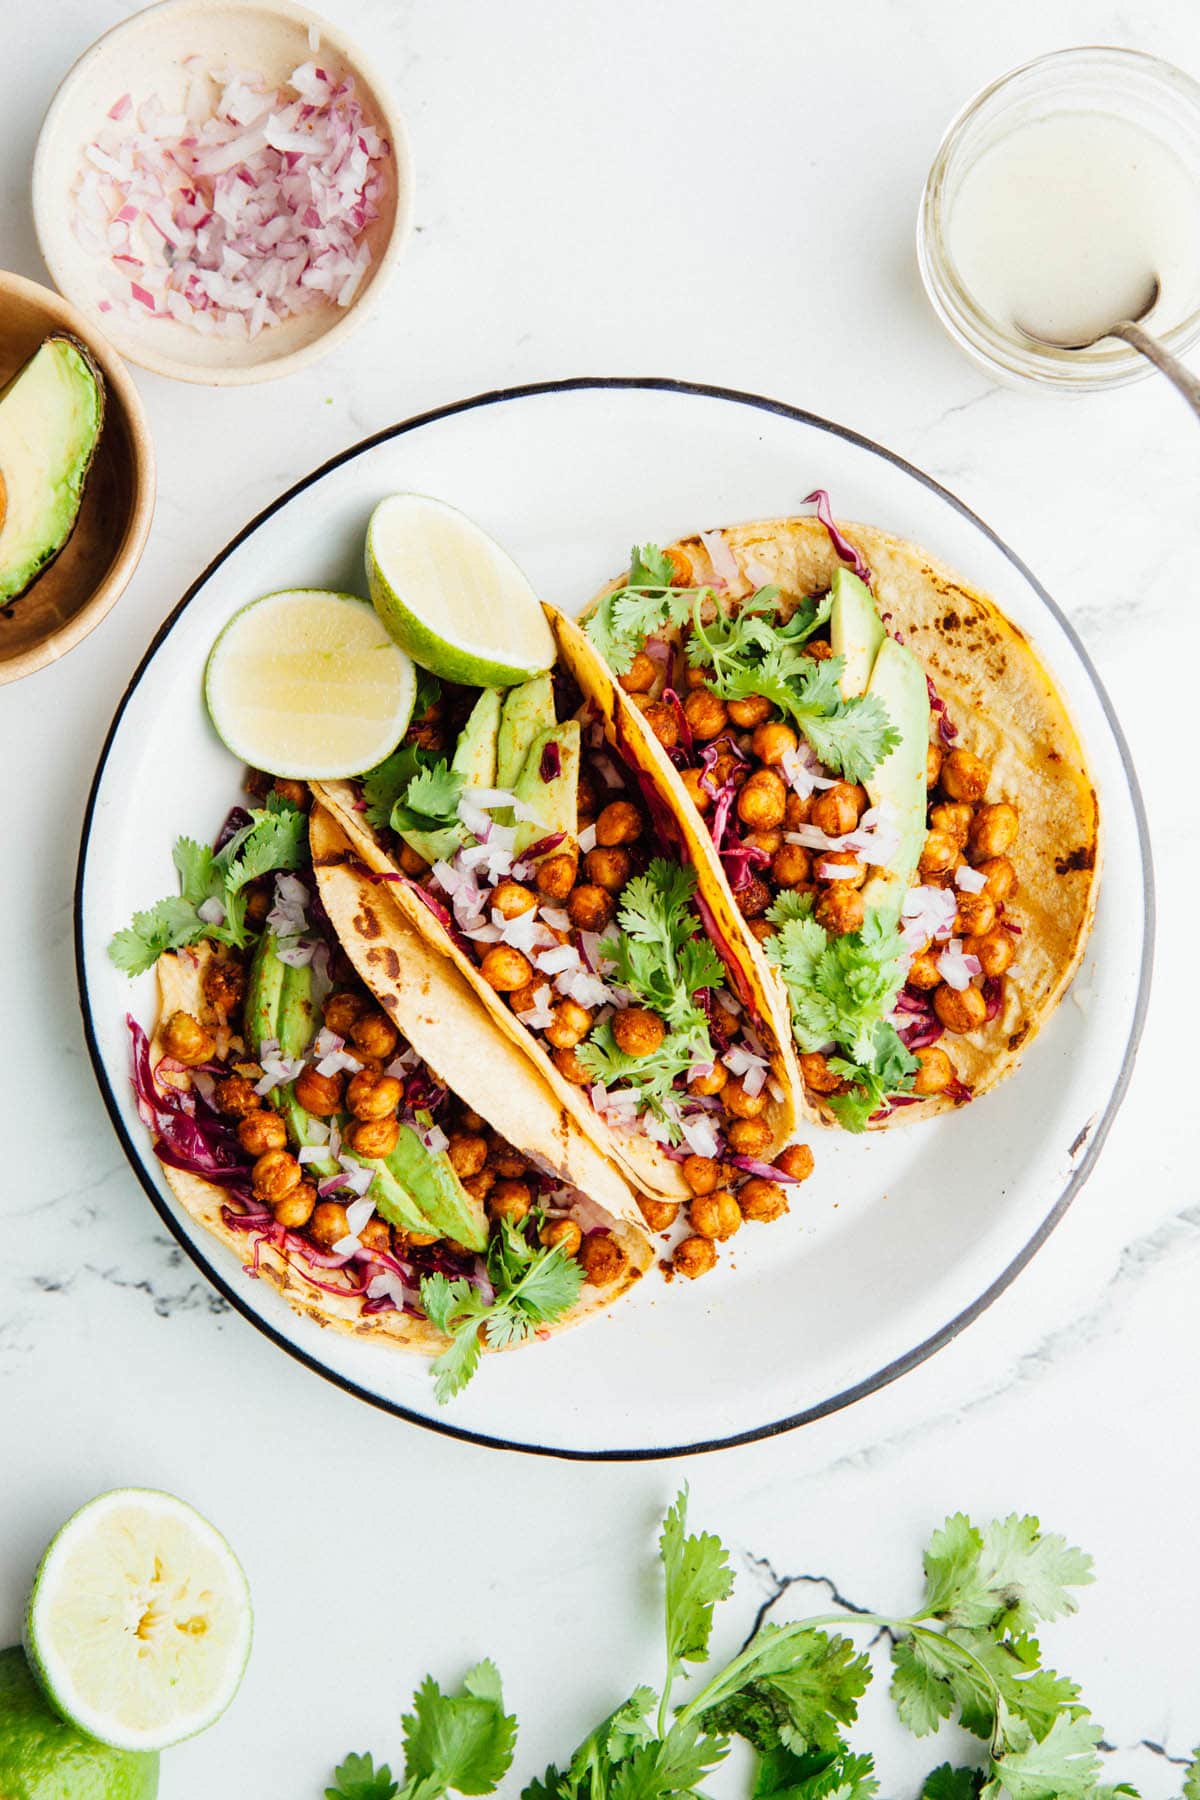 Three roasted chickpea tacos standing upright in a white round enamel plate shot from overhead.